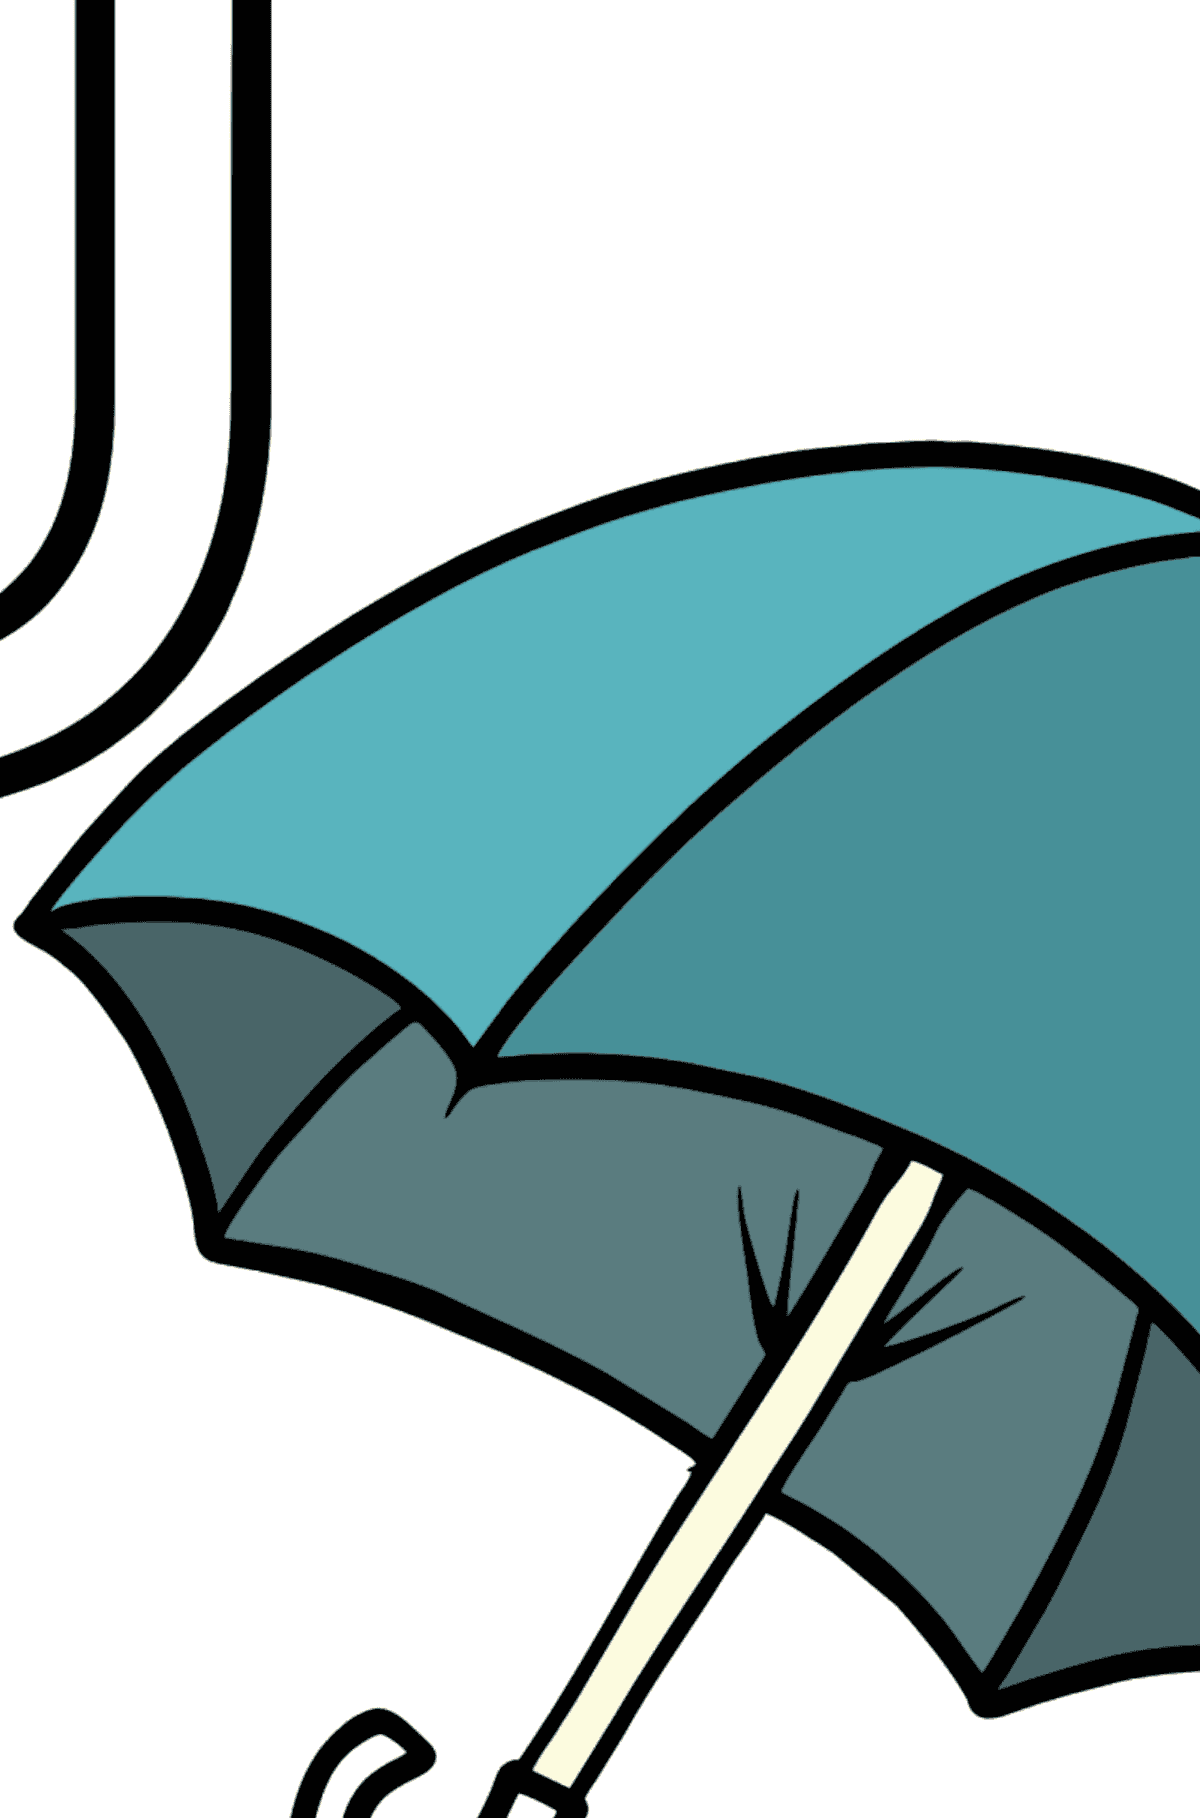 English Letter U coloring pages - UMBRELLA - Coloring by Symbols and Geometric Shapes for Kids